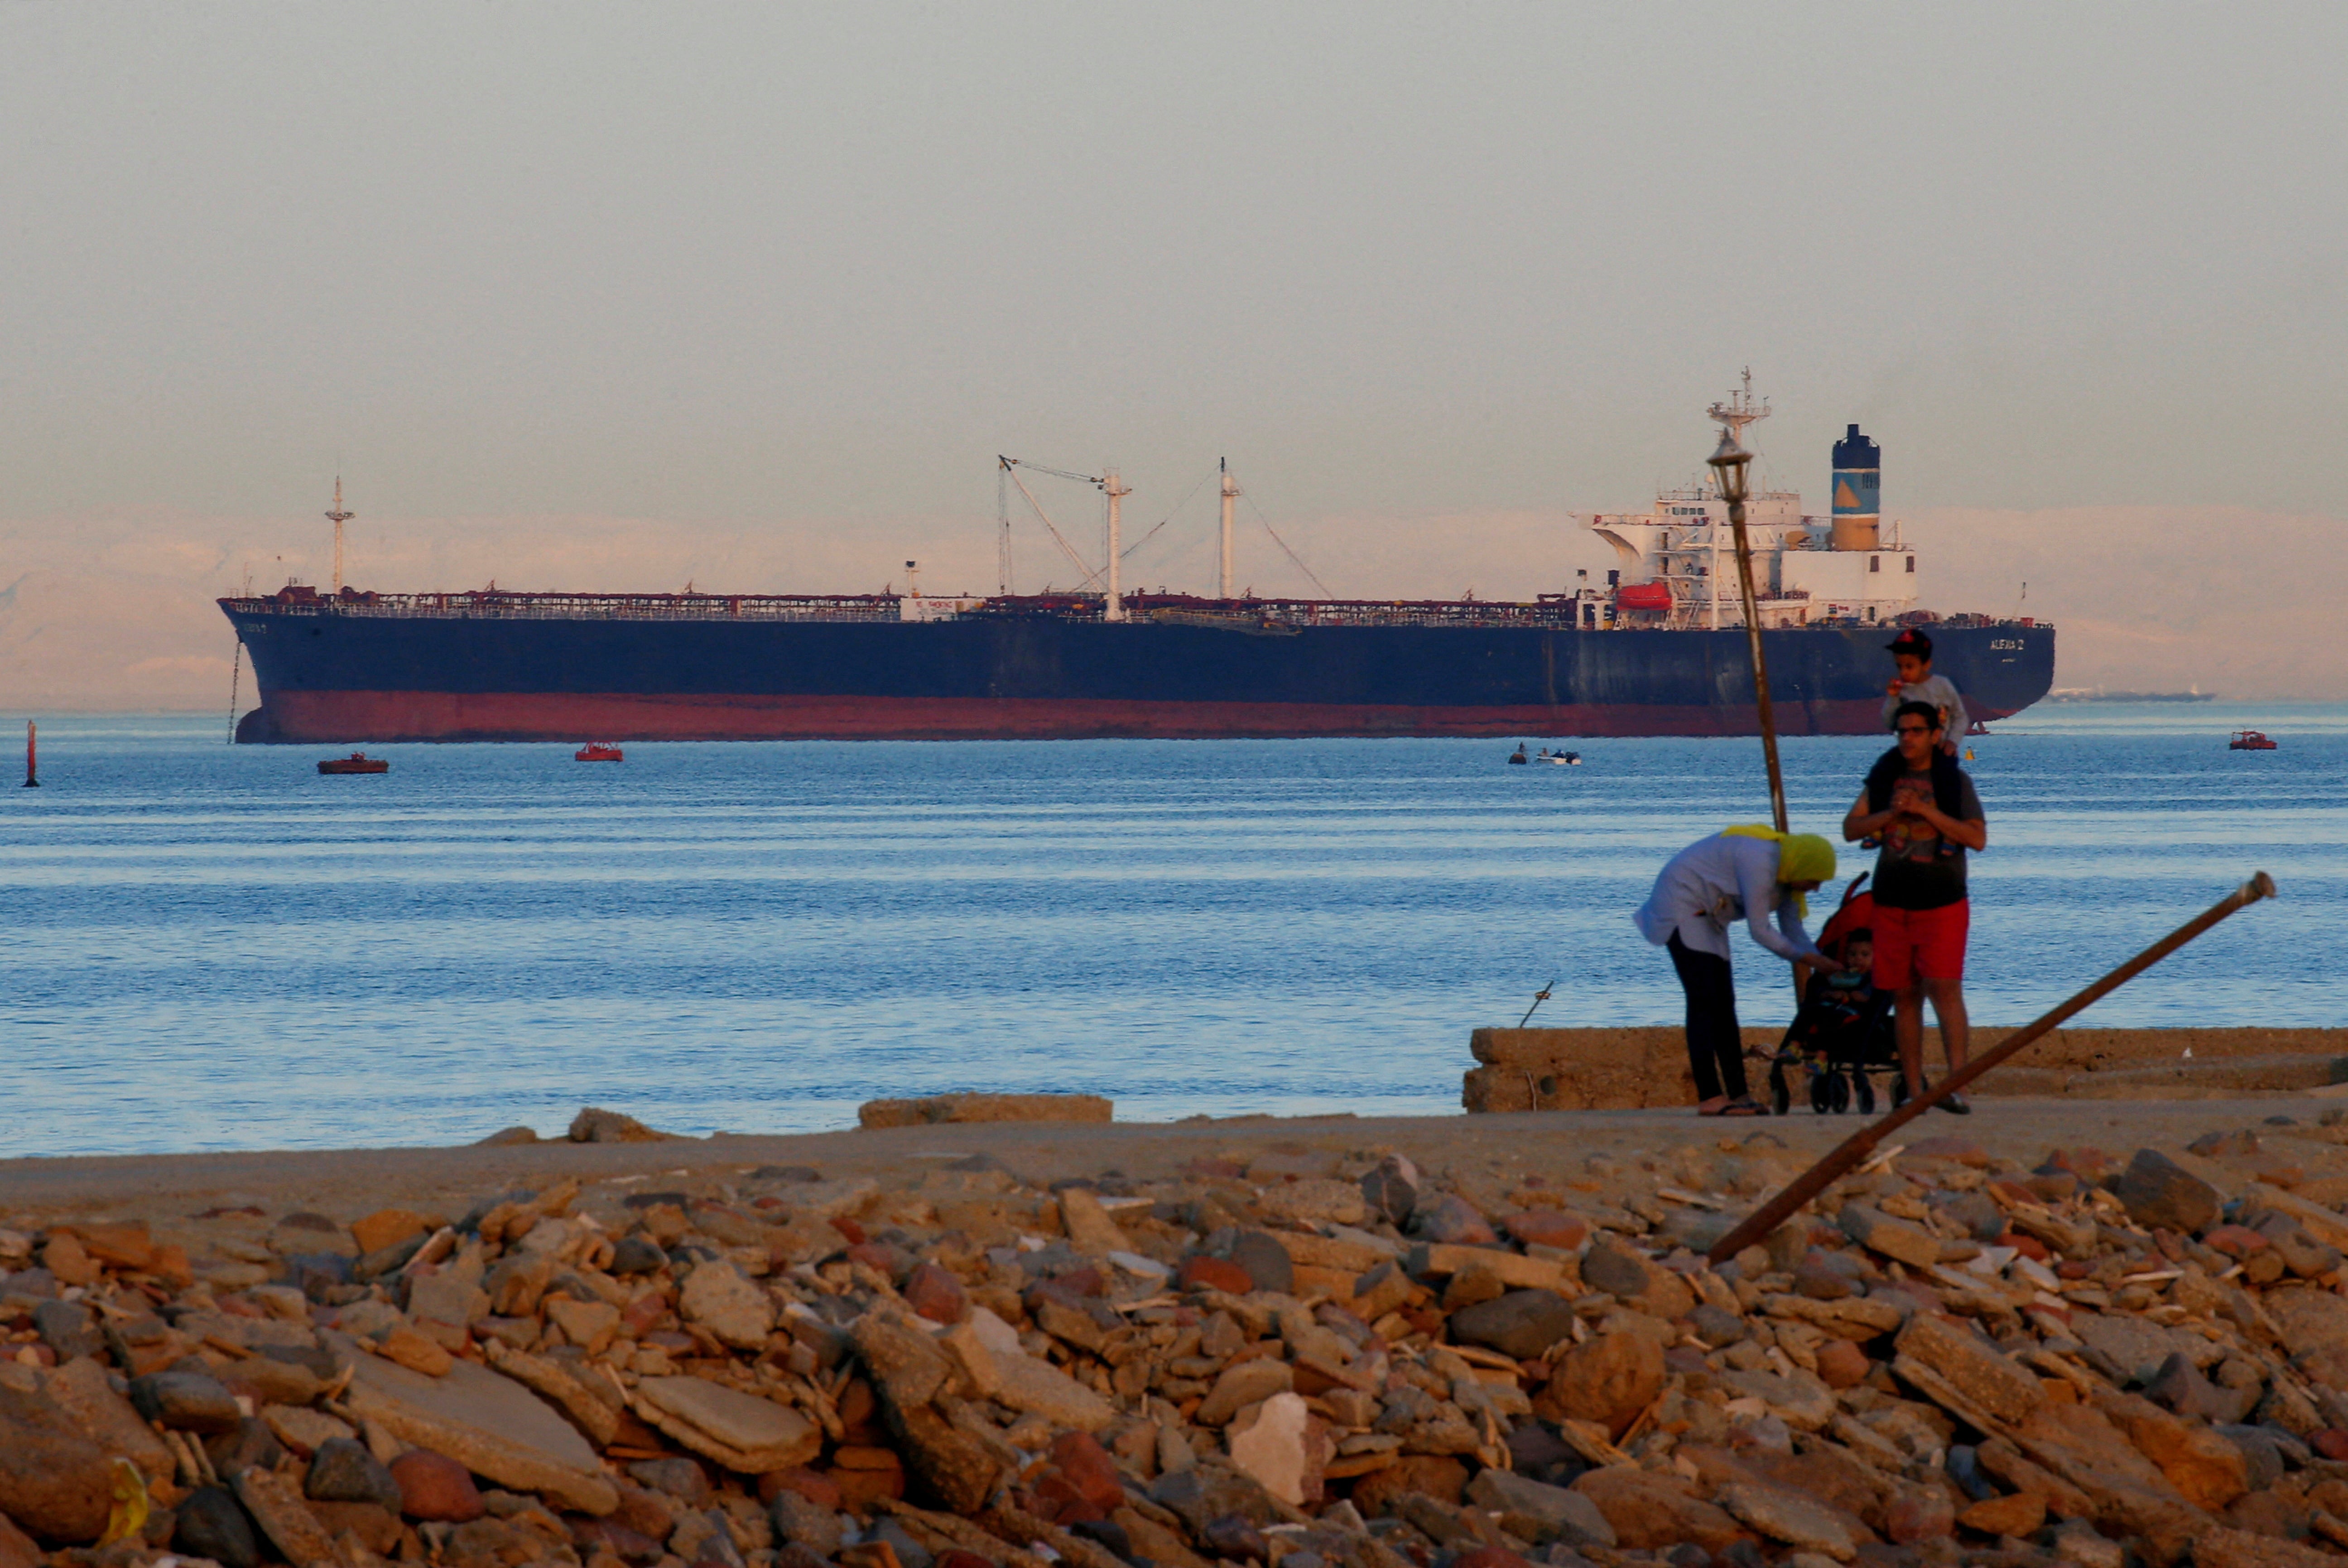 People walk on the beach as a container ship crosses the Gulf of Suez towards the Red Sea before entering the Suez Canal